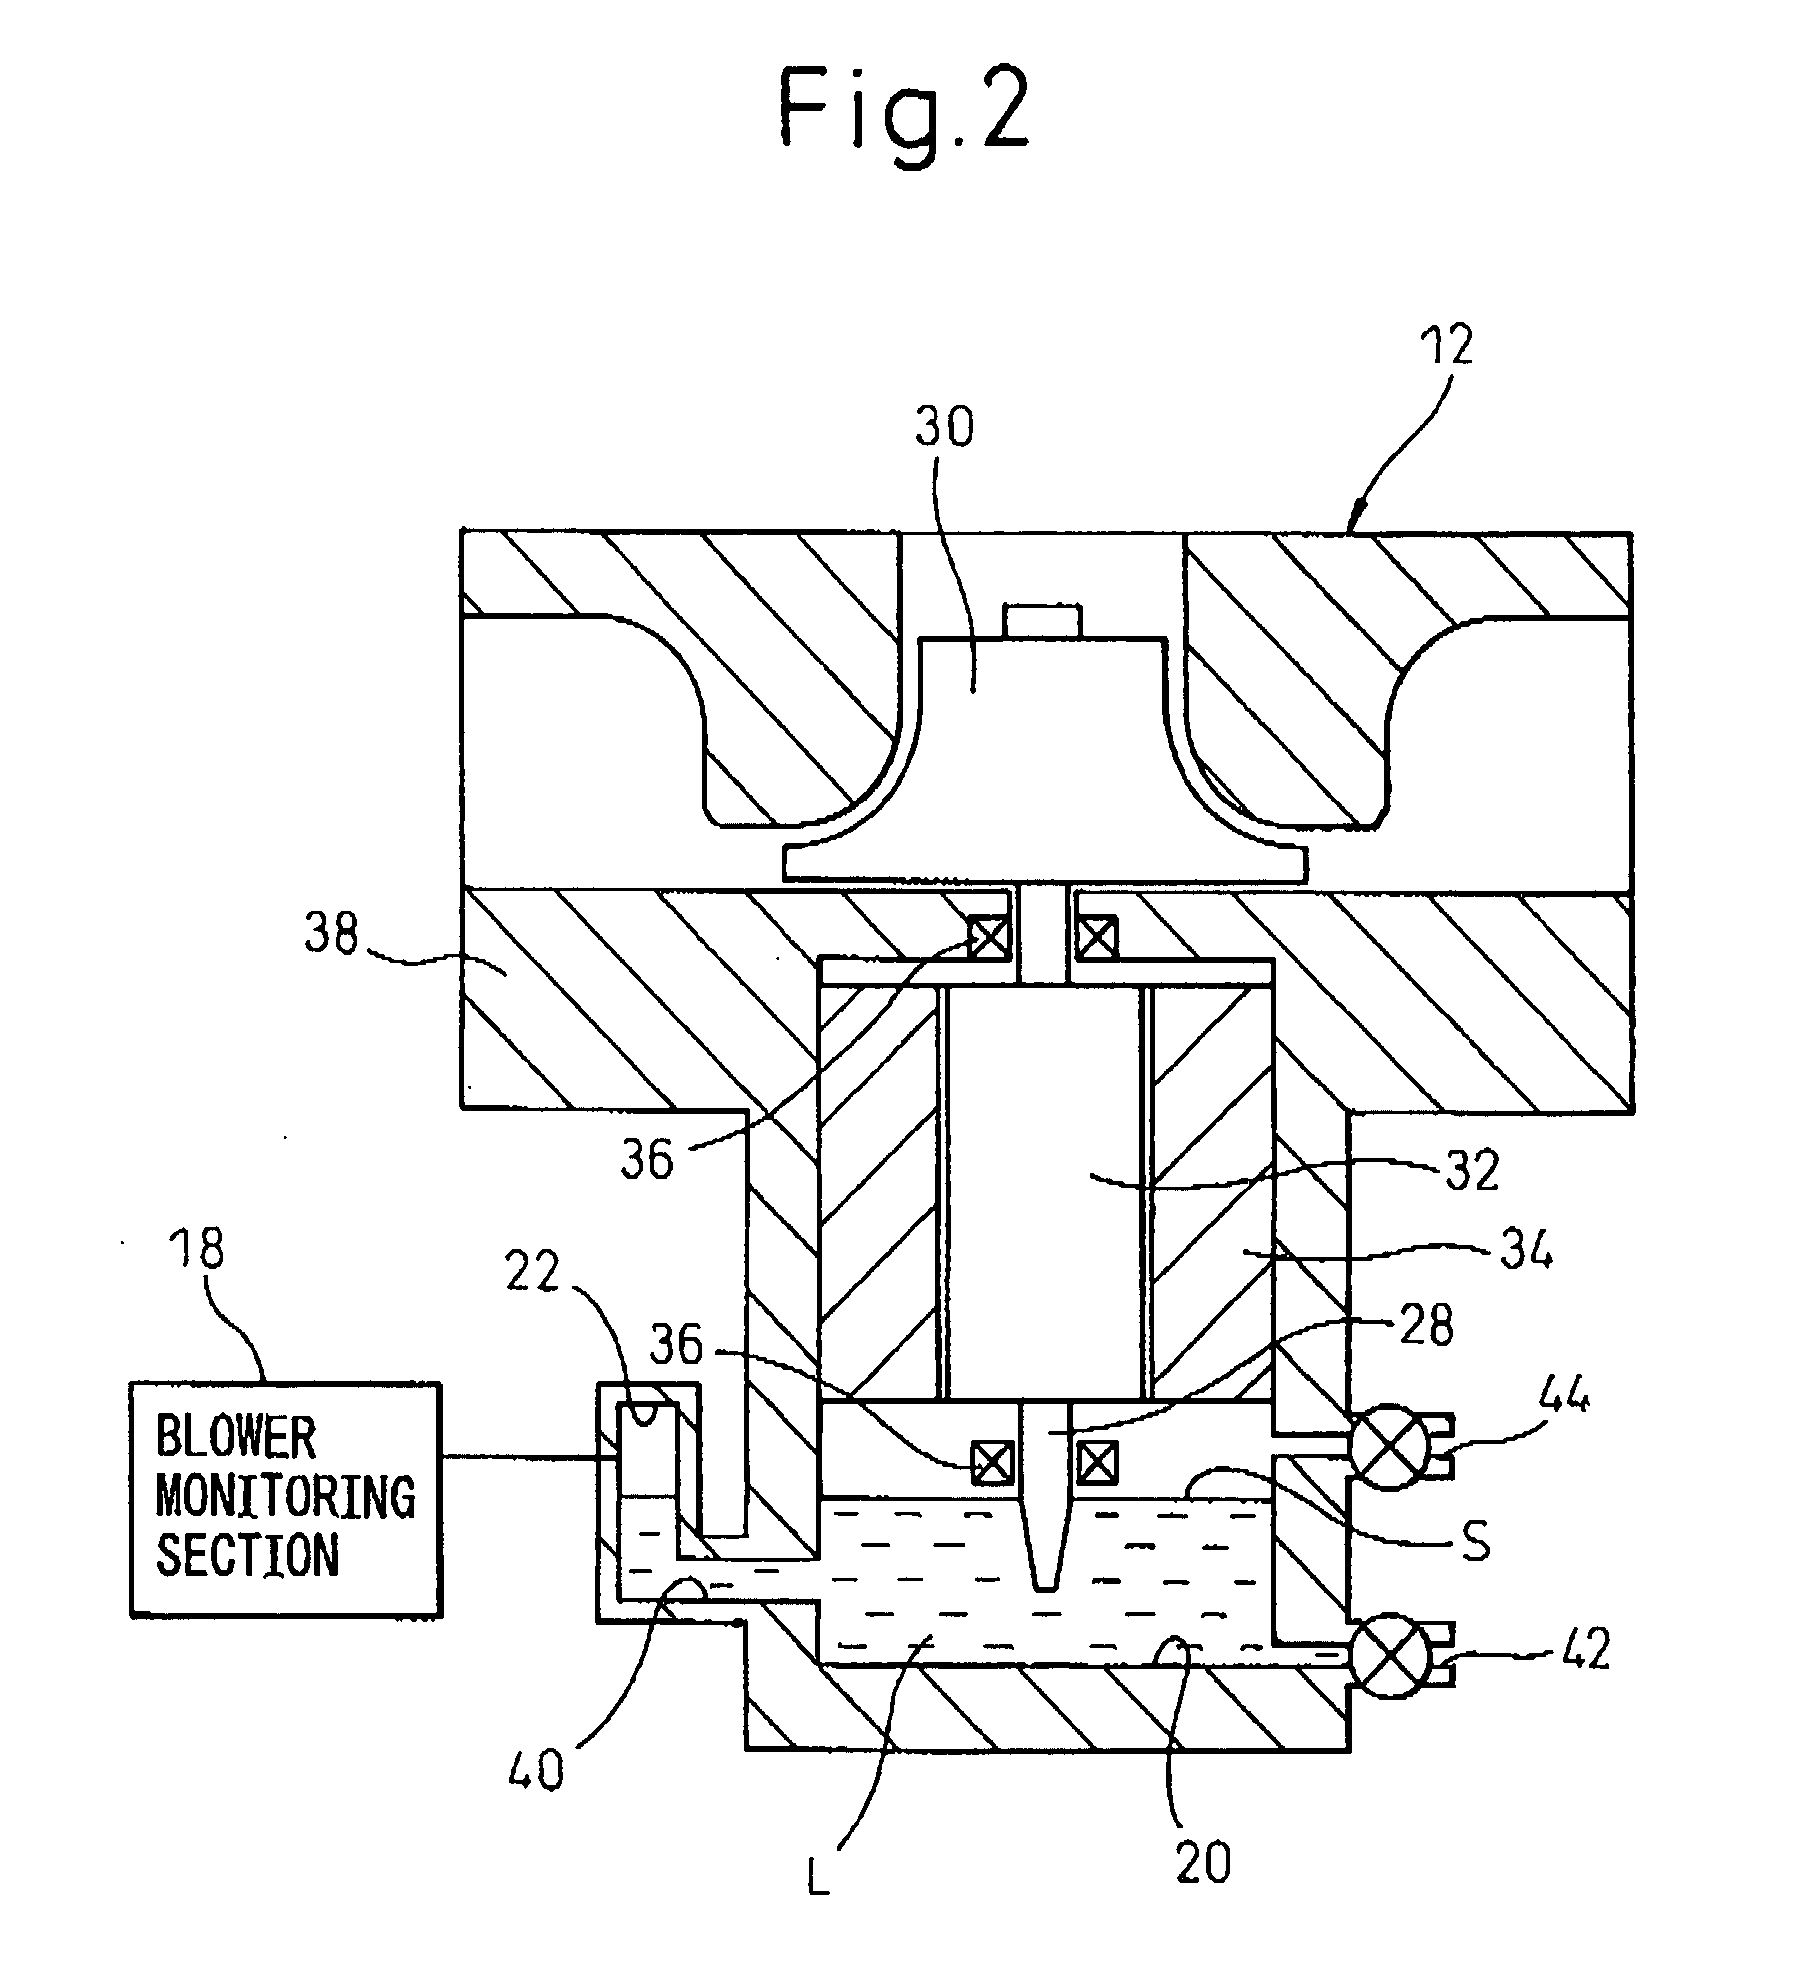 Gas laser apparatus, and method and device for monitoring blower